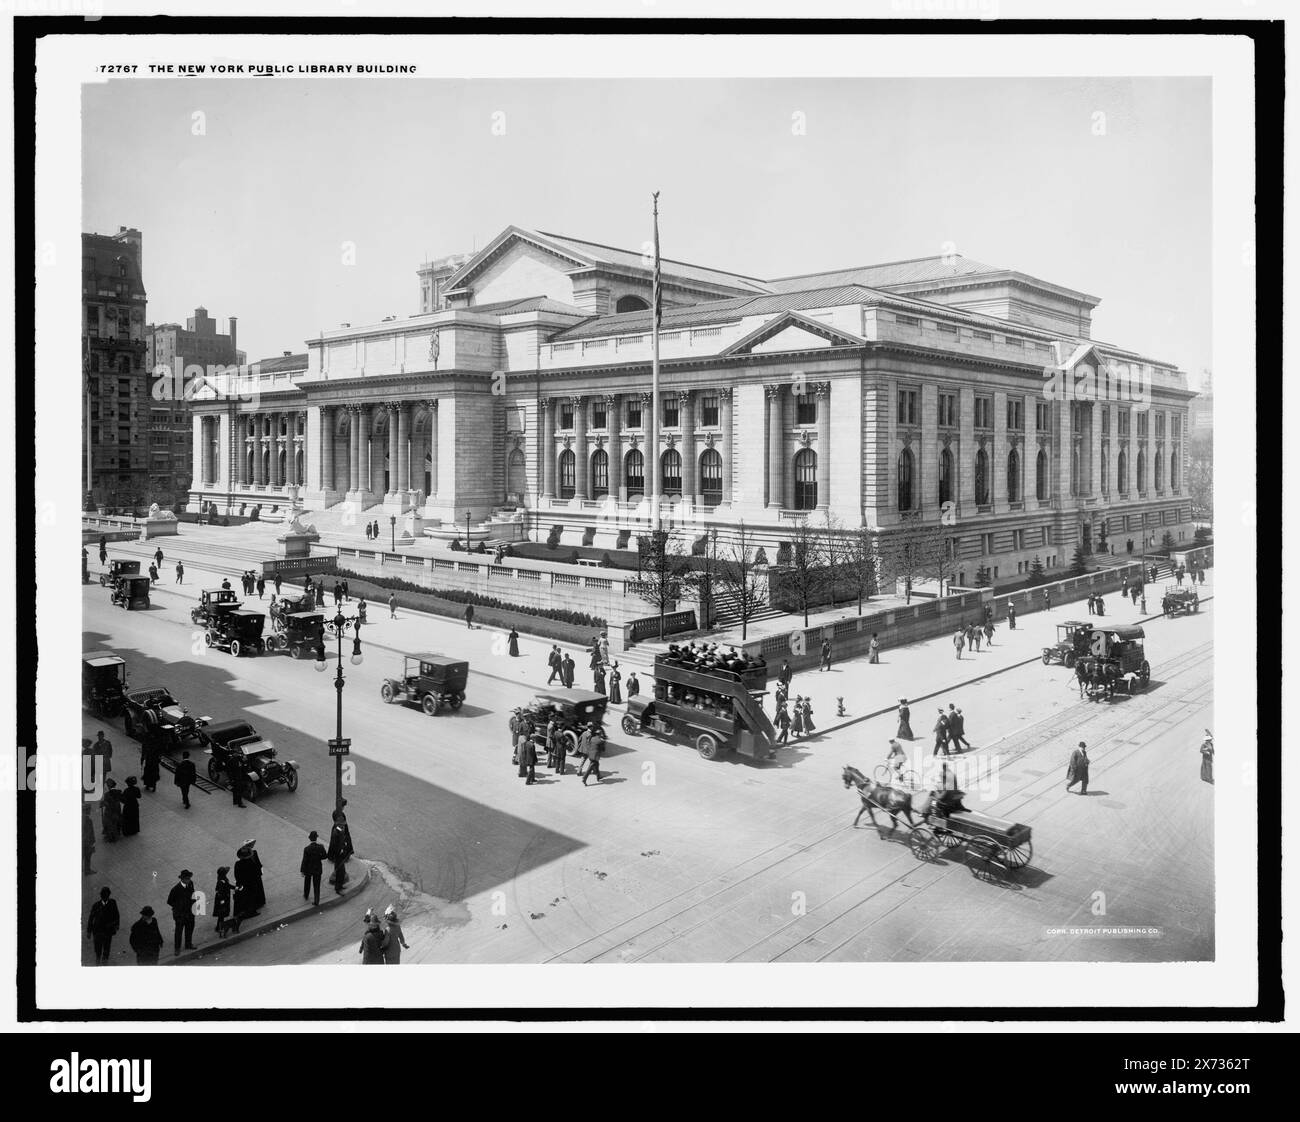 New York Public Library Building, The, Sign on lamppost: E. 42 St., Detroit Publishing Co. no. 072767., Gift; State Historical Society of Colorado; 1949,  New York Public Library. , Libraries. , United States, New York (State), New York. Stock Photo